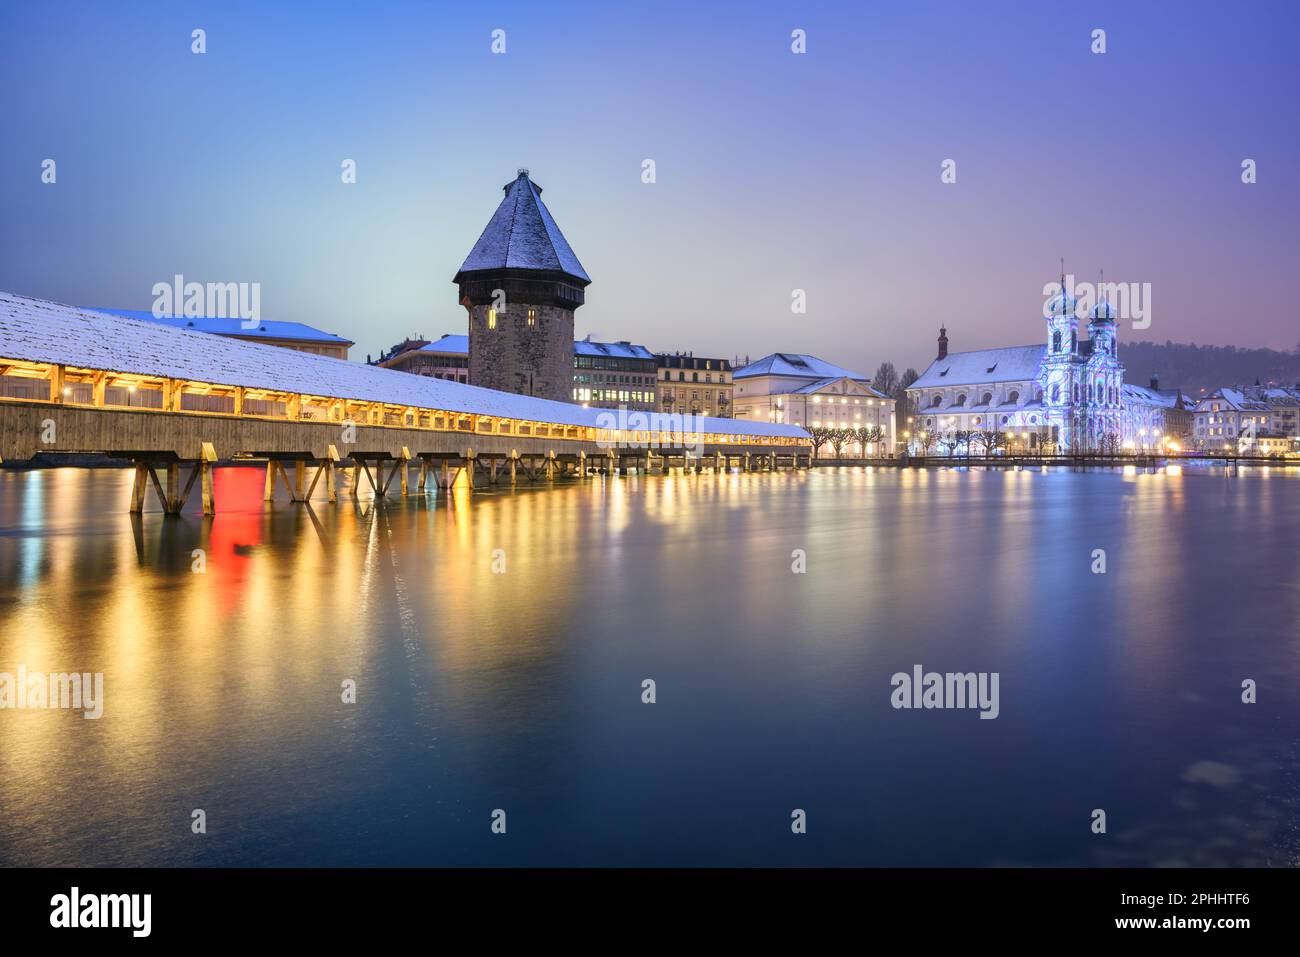 The wooden Chapel bridge, the Water tower and St Francis Jesuit Church reflecting in Reuss river in historical Lucerne Old town, Switzerland, on a win Stock Photo